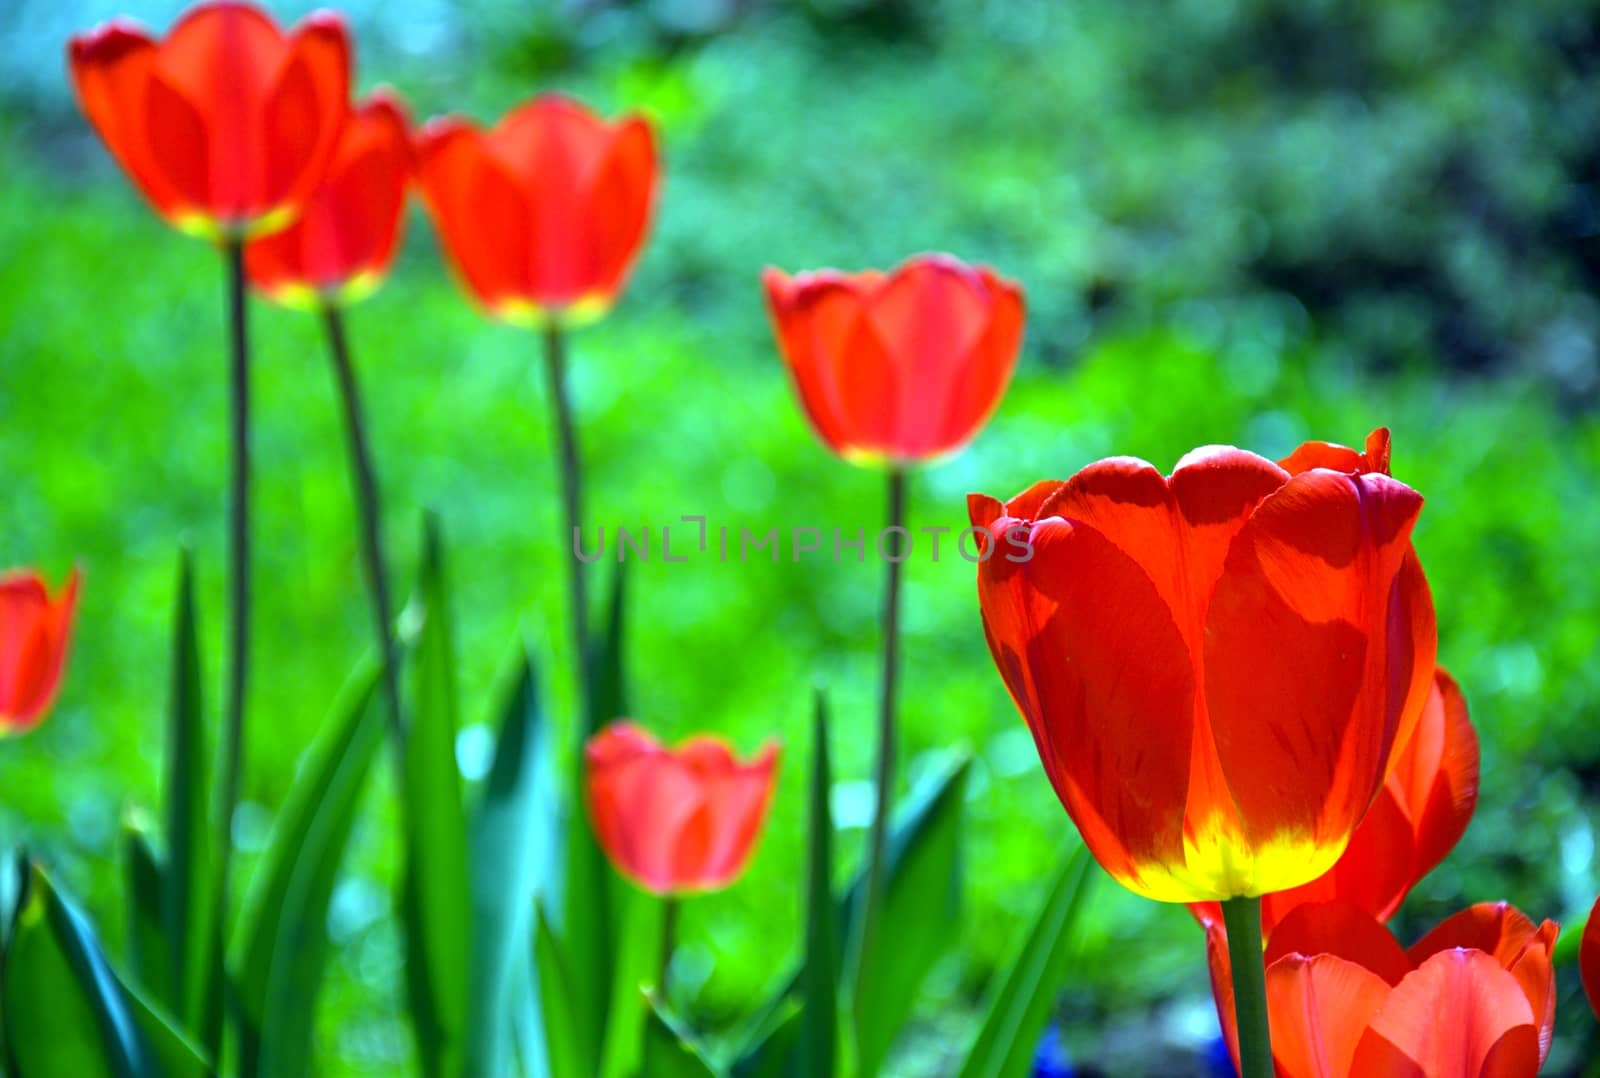 The red tulips on the green meadow. 
